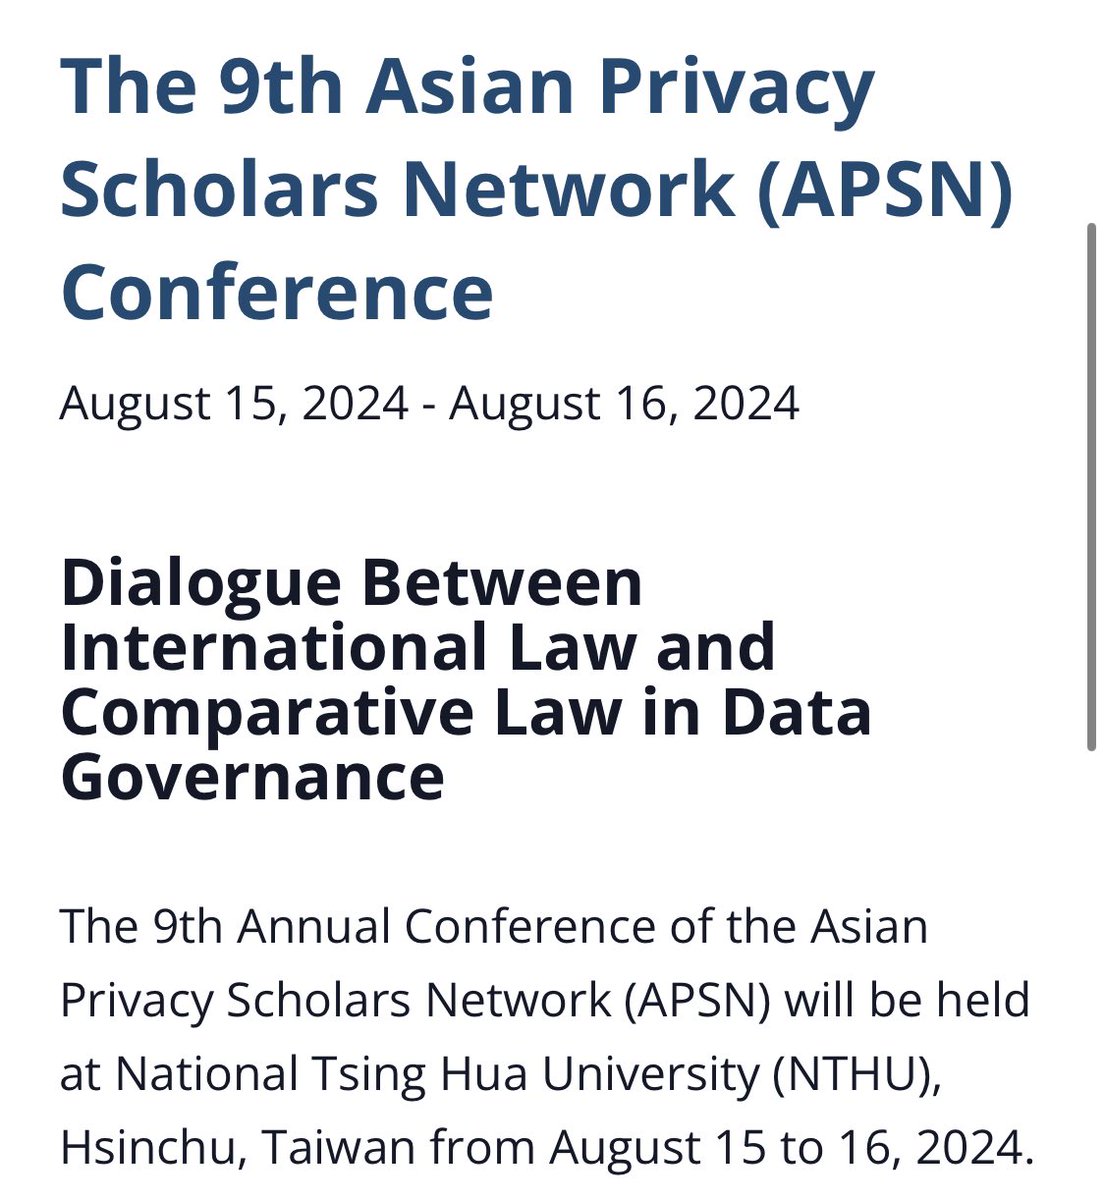 Submit now and come to @NTHU_TAIWAN for another exciting #datagovernance #privacy #law #technology #globalgovernance conference in August 2024! @asilorg_ILTchIG @SgSMUYPHSL @hanweiliu and Asian Privacy Scholars Network 🌍🌏🌎